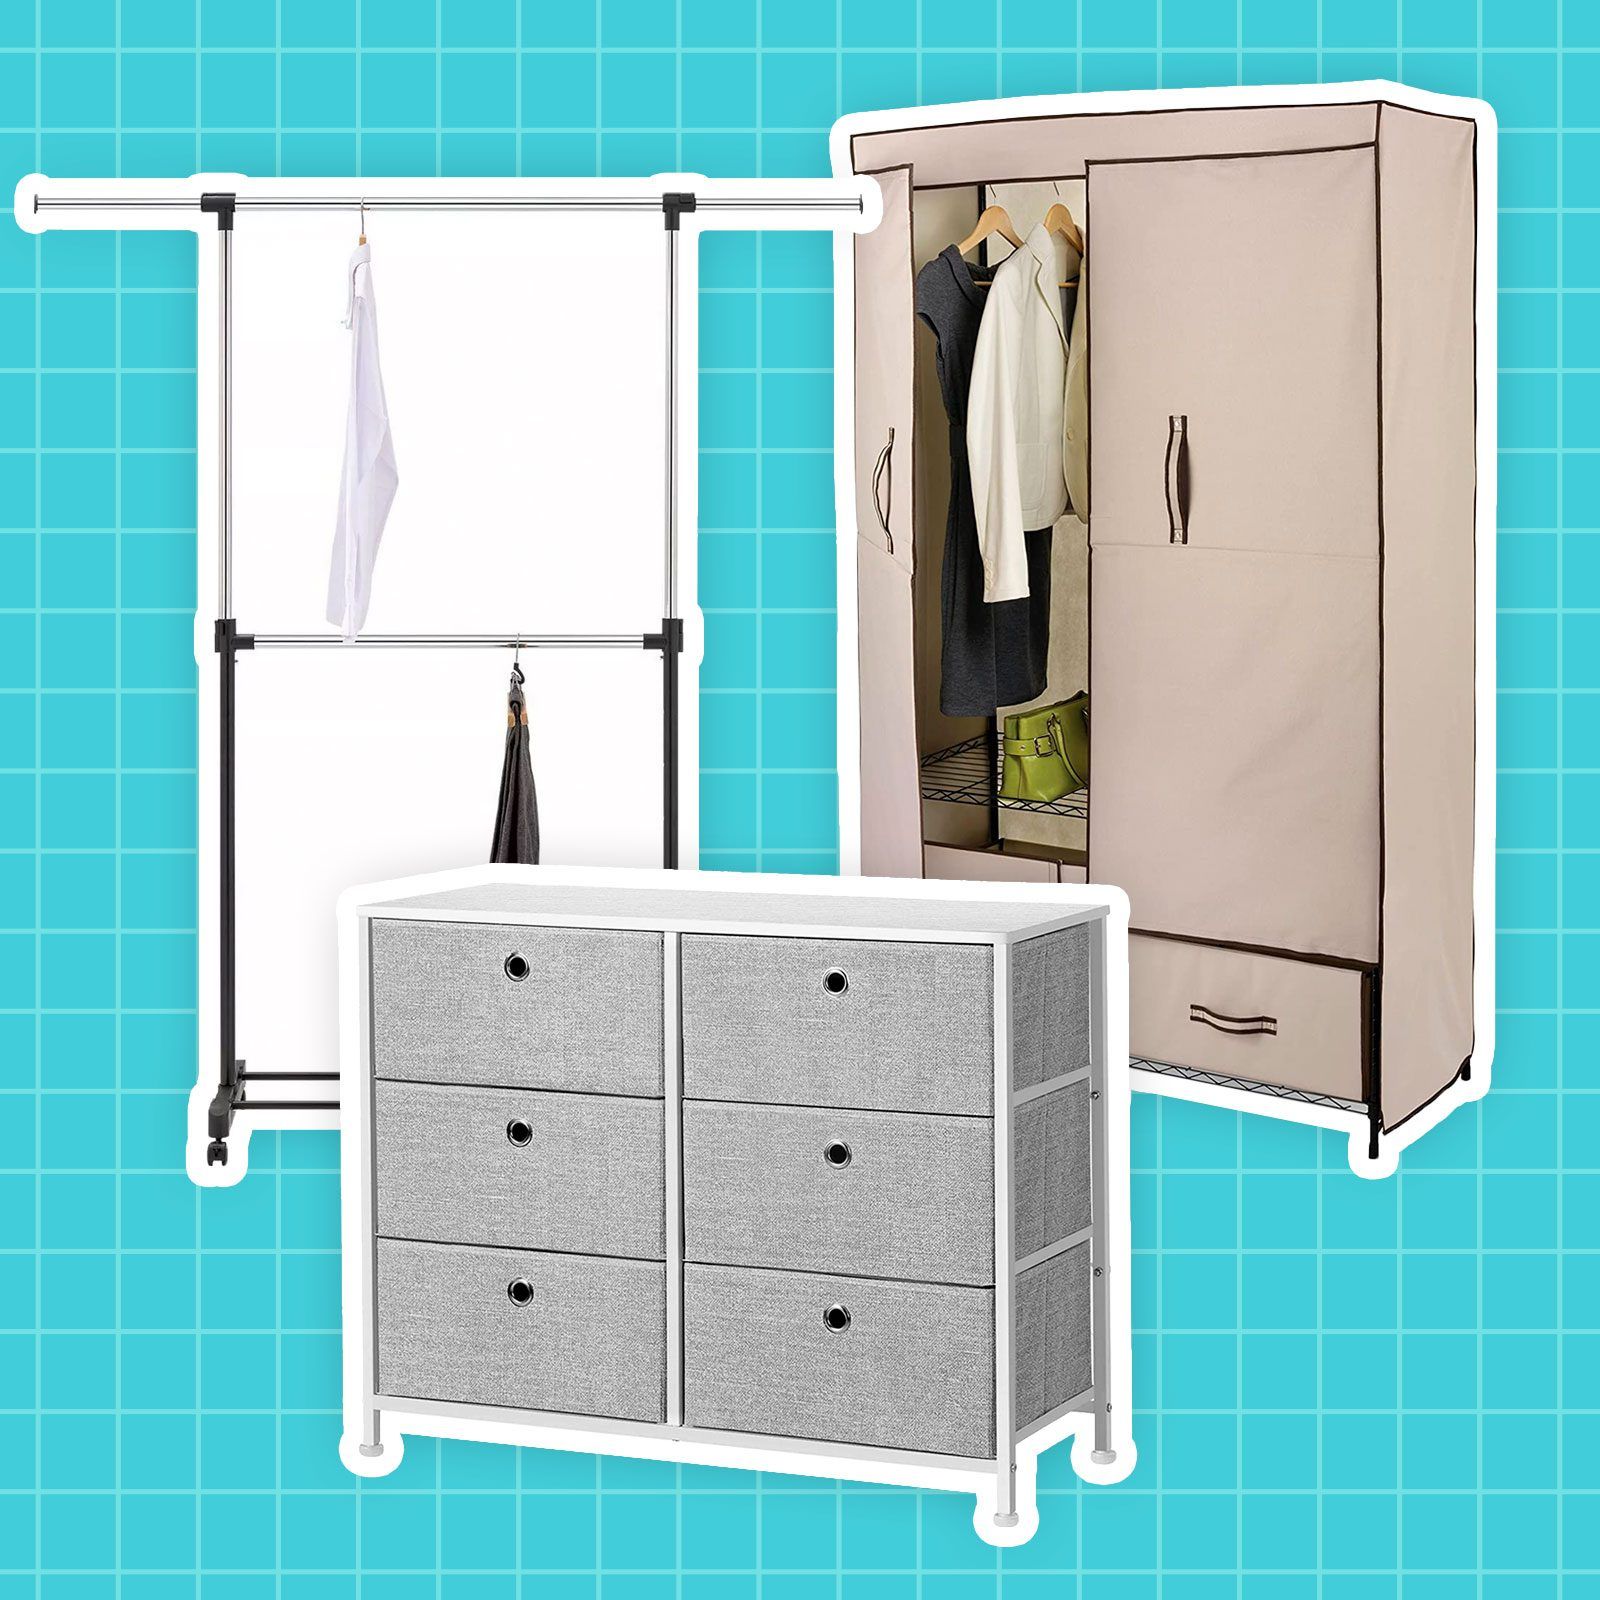 10 Best Portable Closets For Every Space 2021 | Reader's Digest Intended For Portable Wardrobes (View 17 of 20)